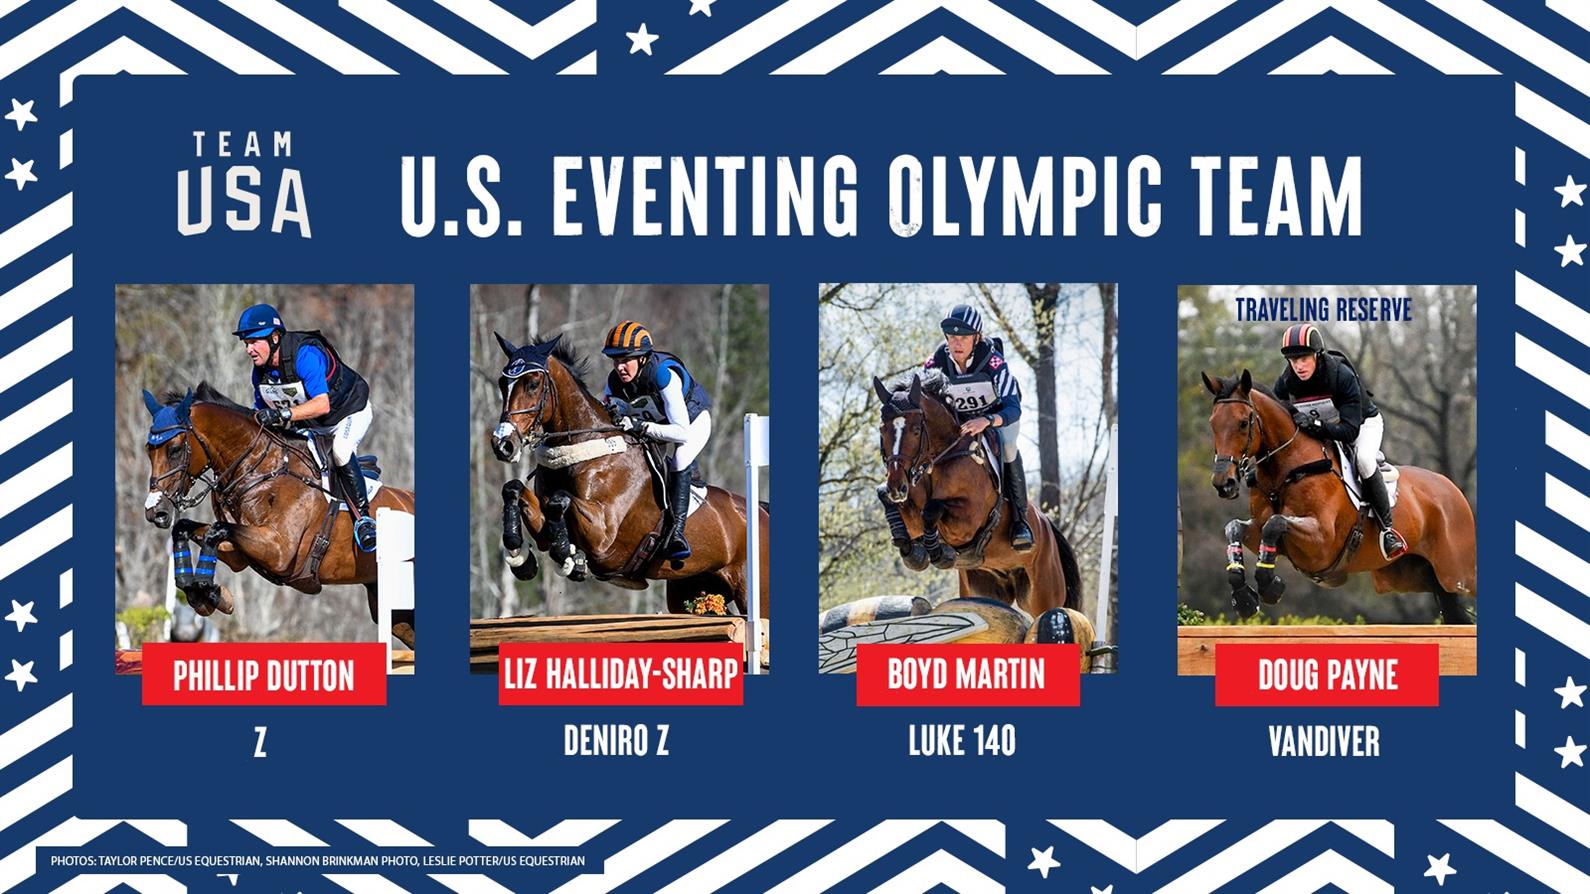 US Equestrian Announces U.S. Eventing Olympic Team for Olympic Games